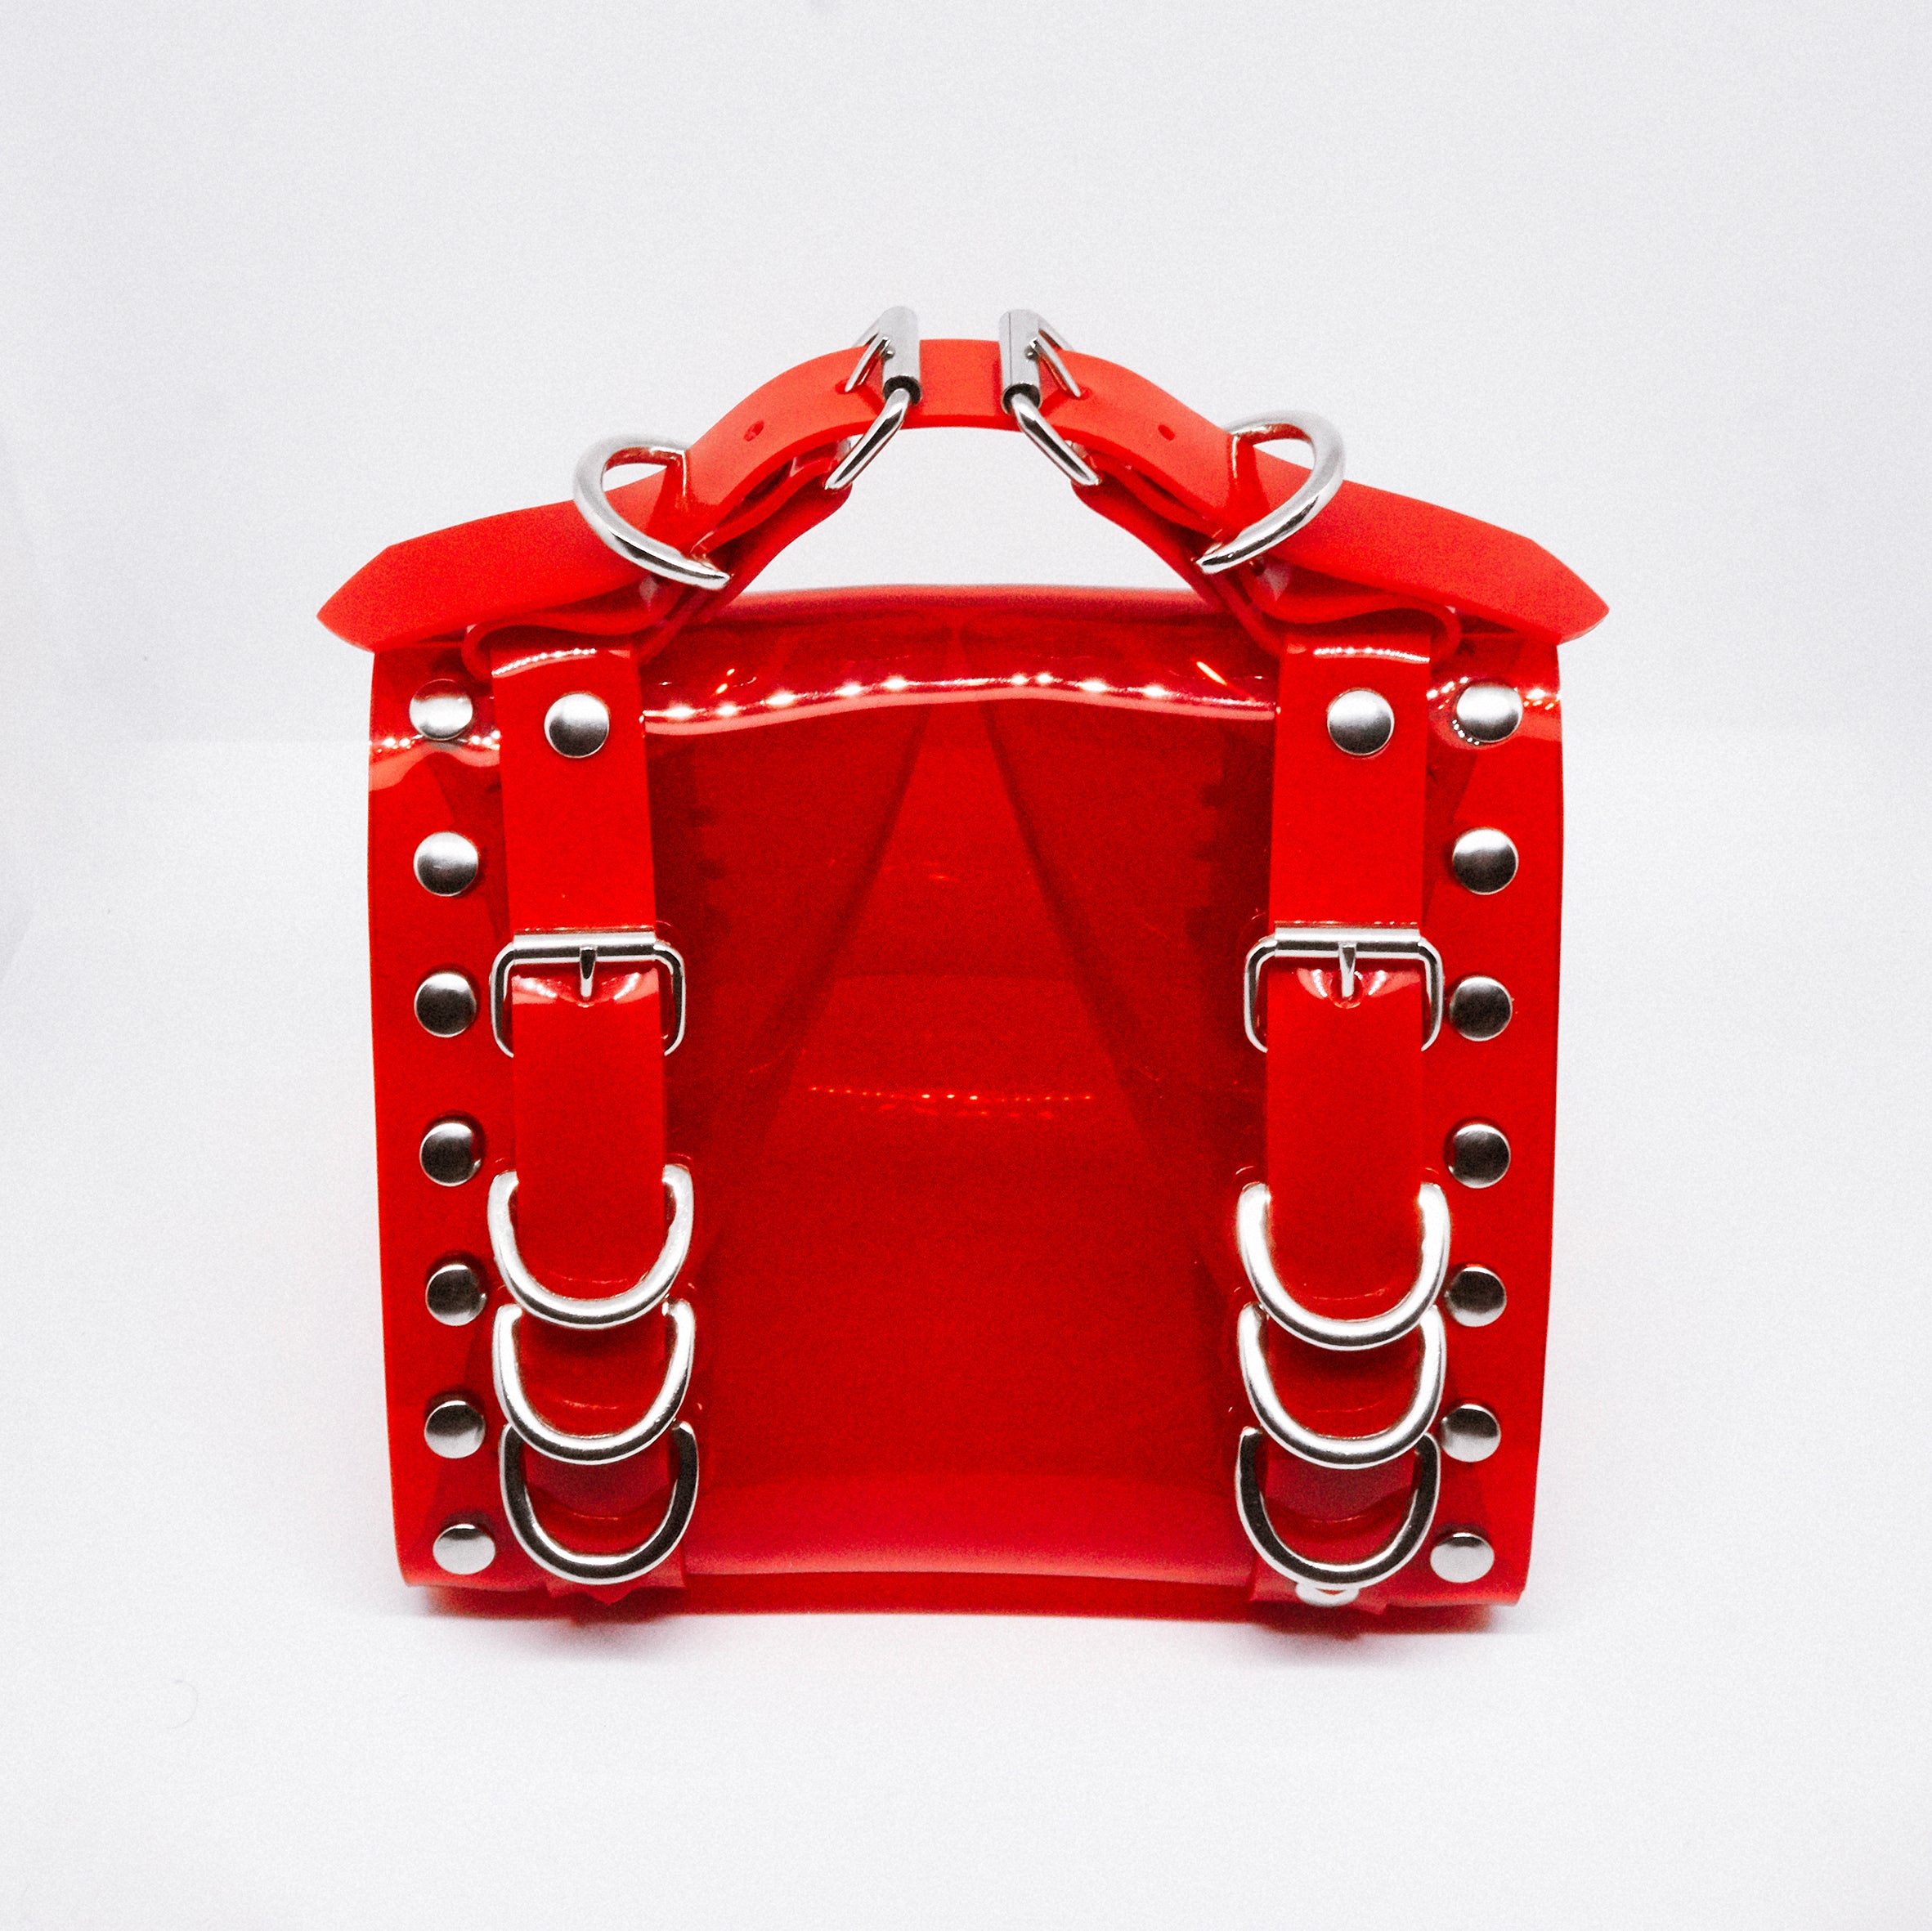 Jivomir Domoustchiev vegan vinyl pvc fashion wearable sculpture hand crafted to order only in East London Atelier independent luxury brand vegan fashion purse hand bag